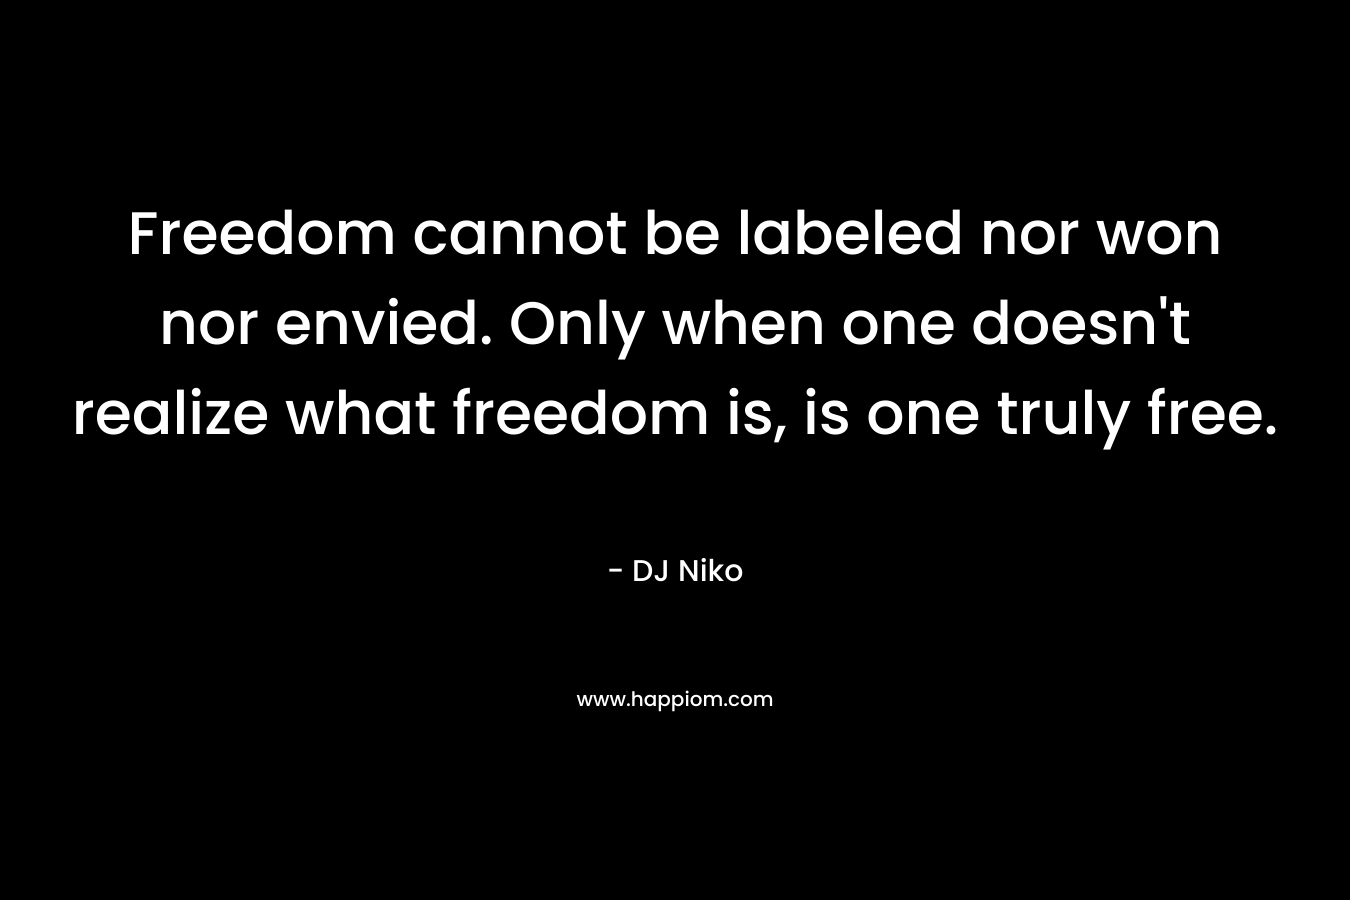 Freedom cannot be labeled nor won nor envied. Only when one doesn't realize what freedom is, is one truly free.